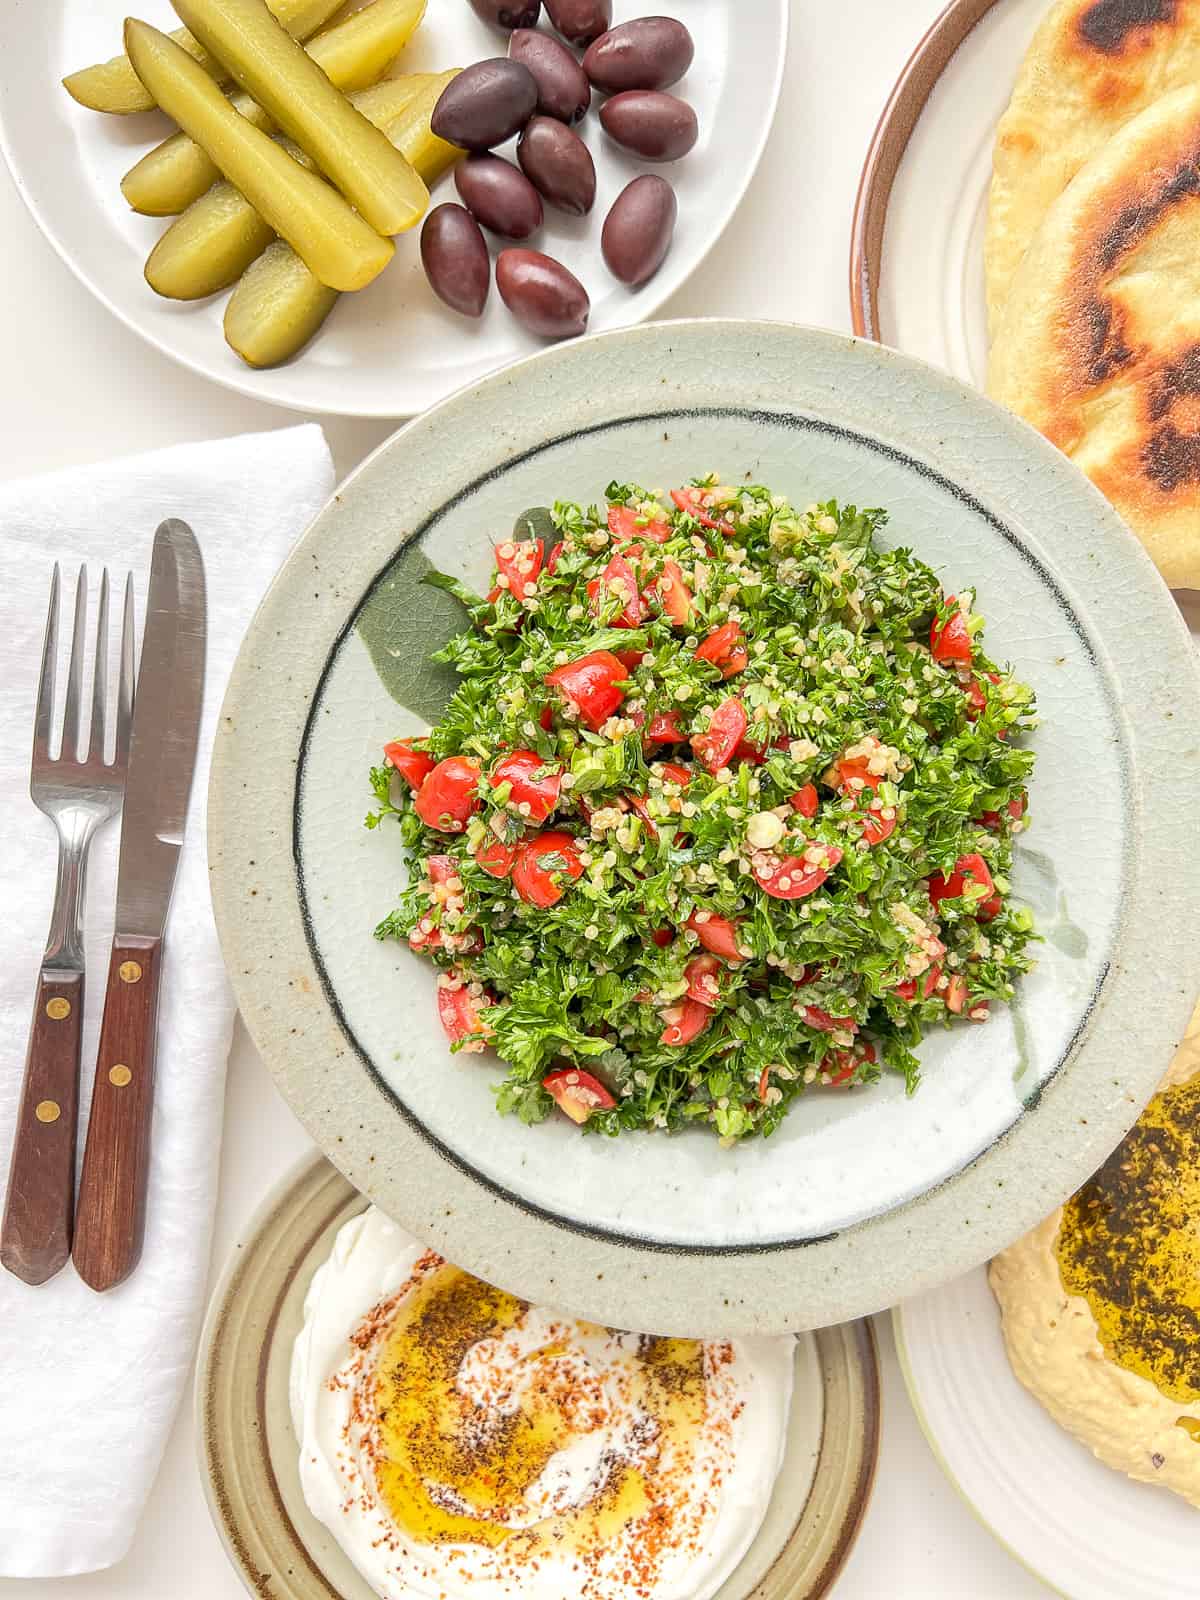 An image of a plate of tabbouleh surrounded by other meze dishes.